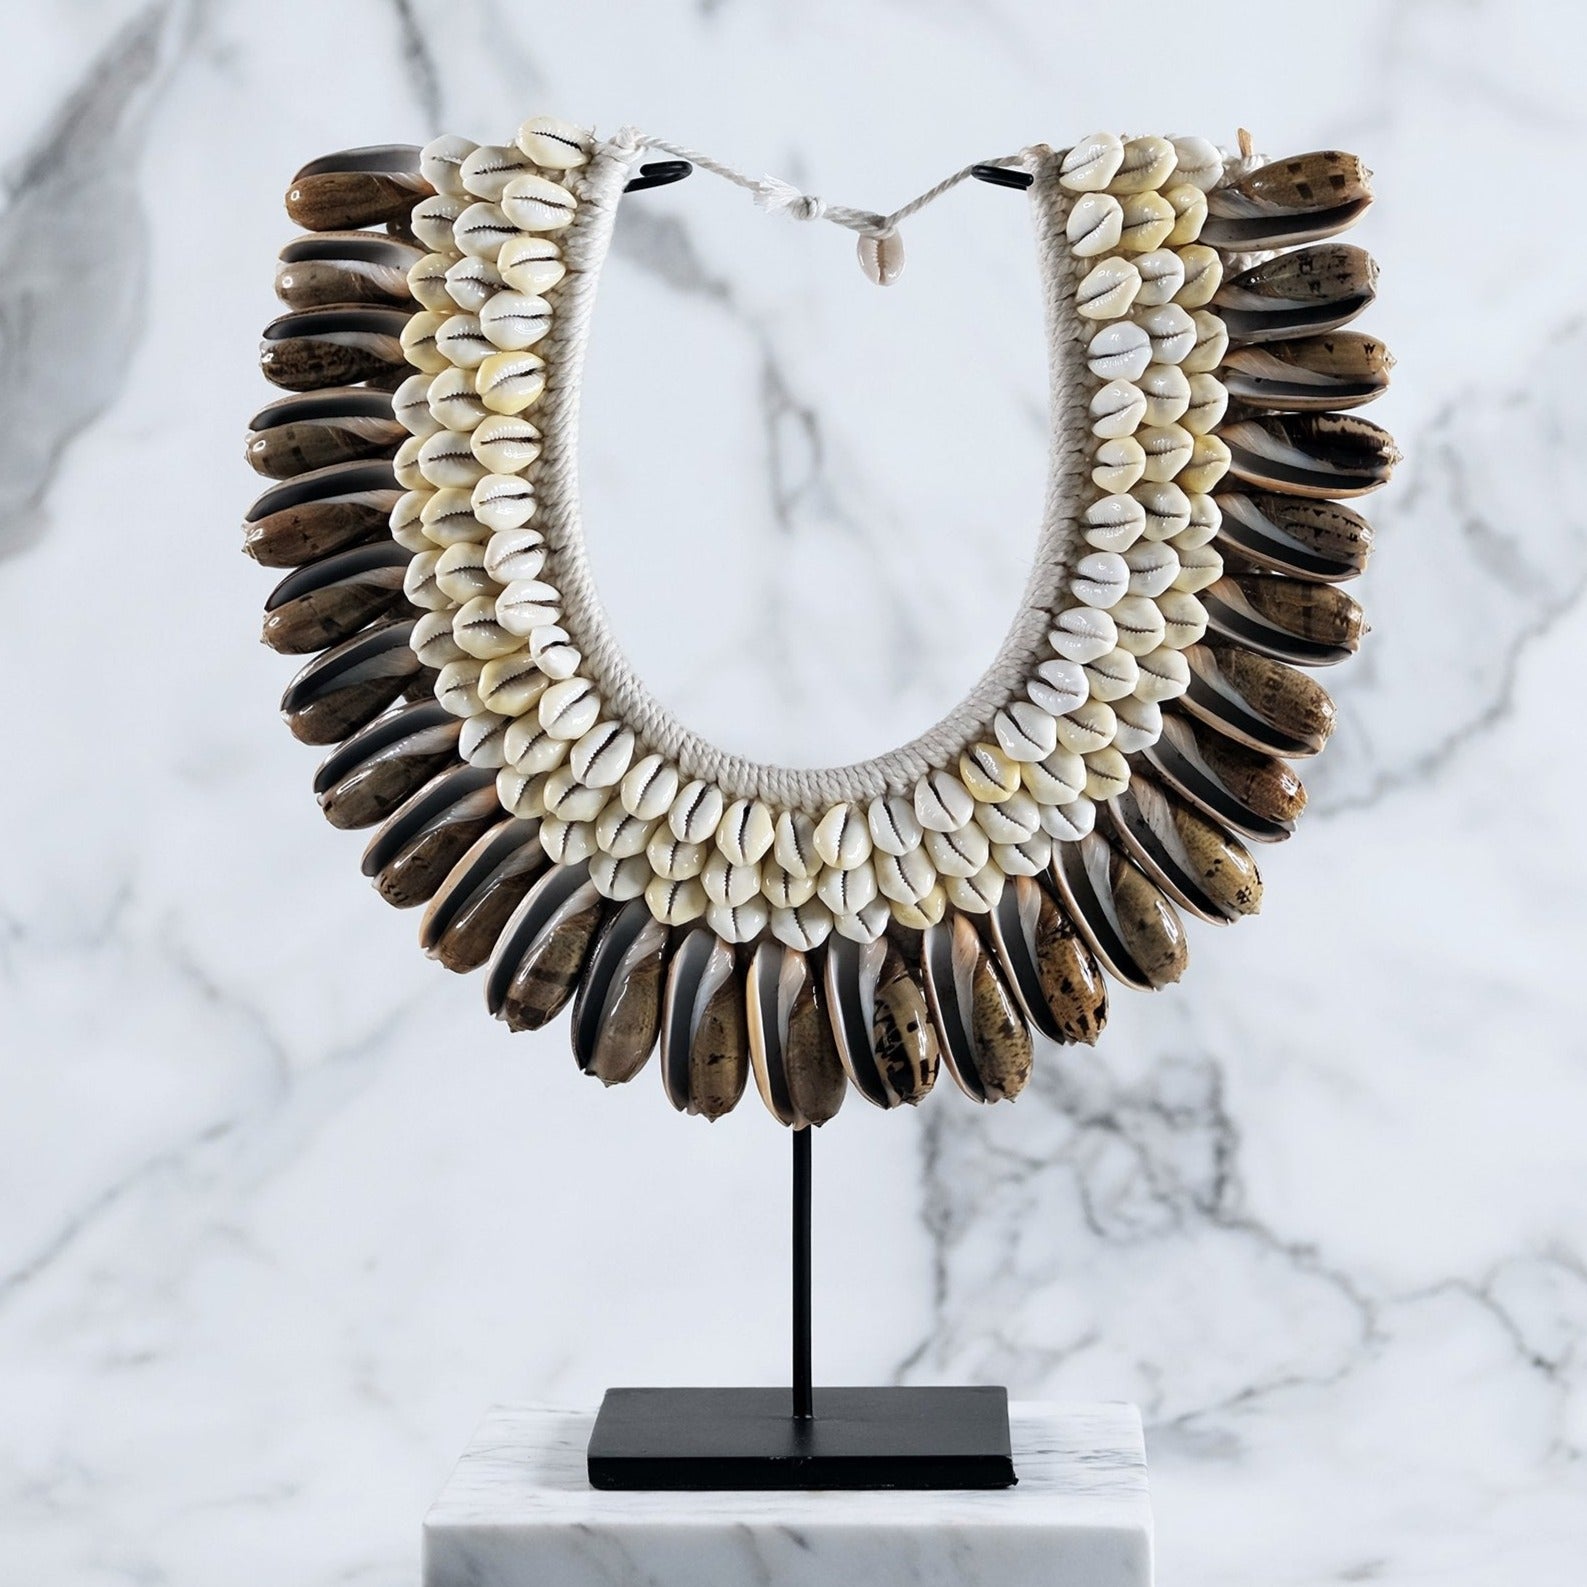 Balinese ceremonial necklace